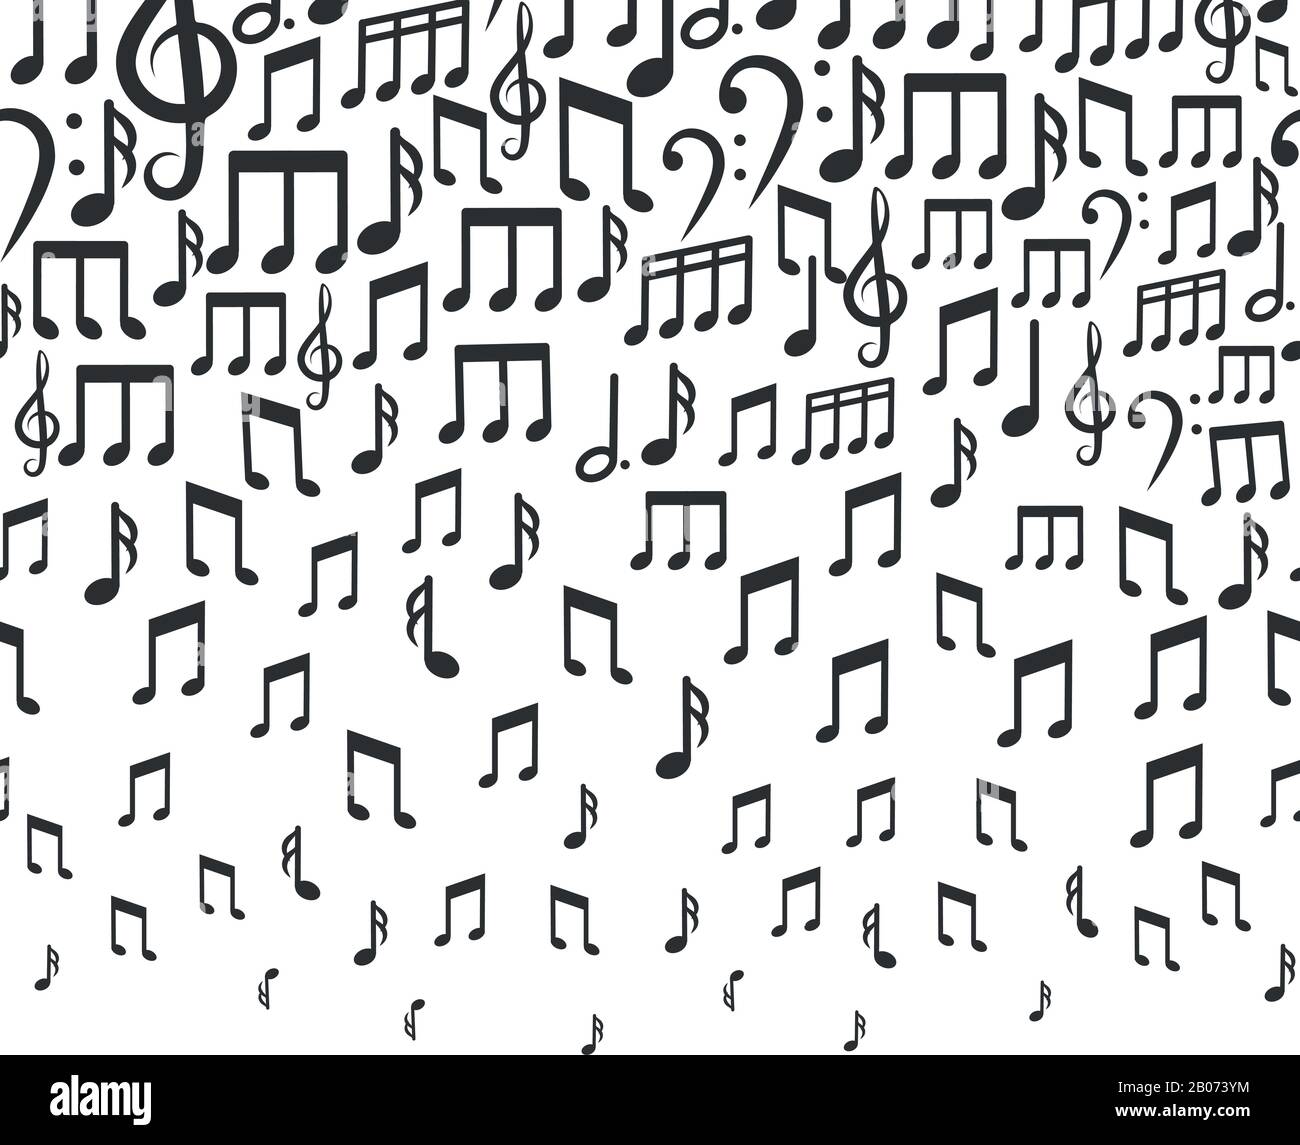 Music vector background with falling musical notes. Rhythm tempo and bass sound illustration Stock Vector